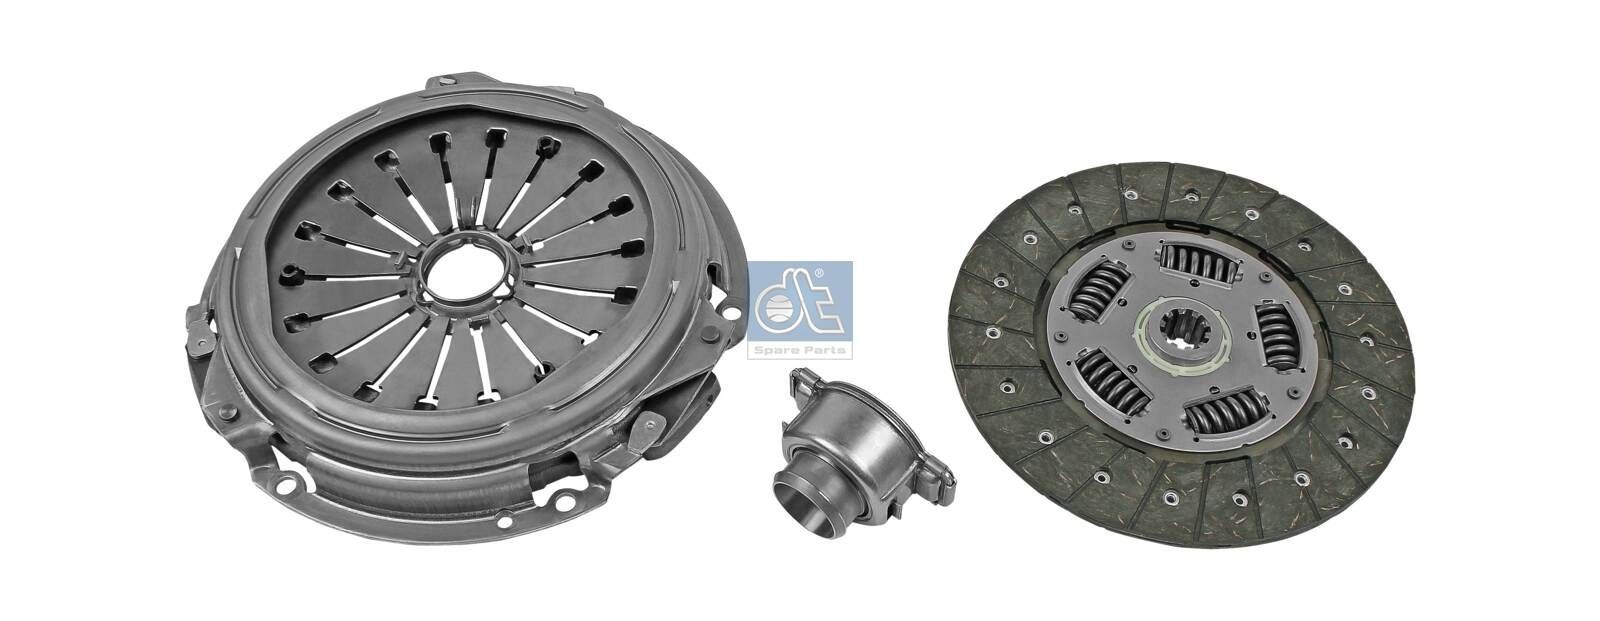 Original 7.90528 DT Spare Parts Clutch kit experience and price